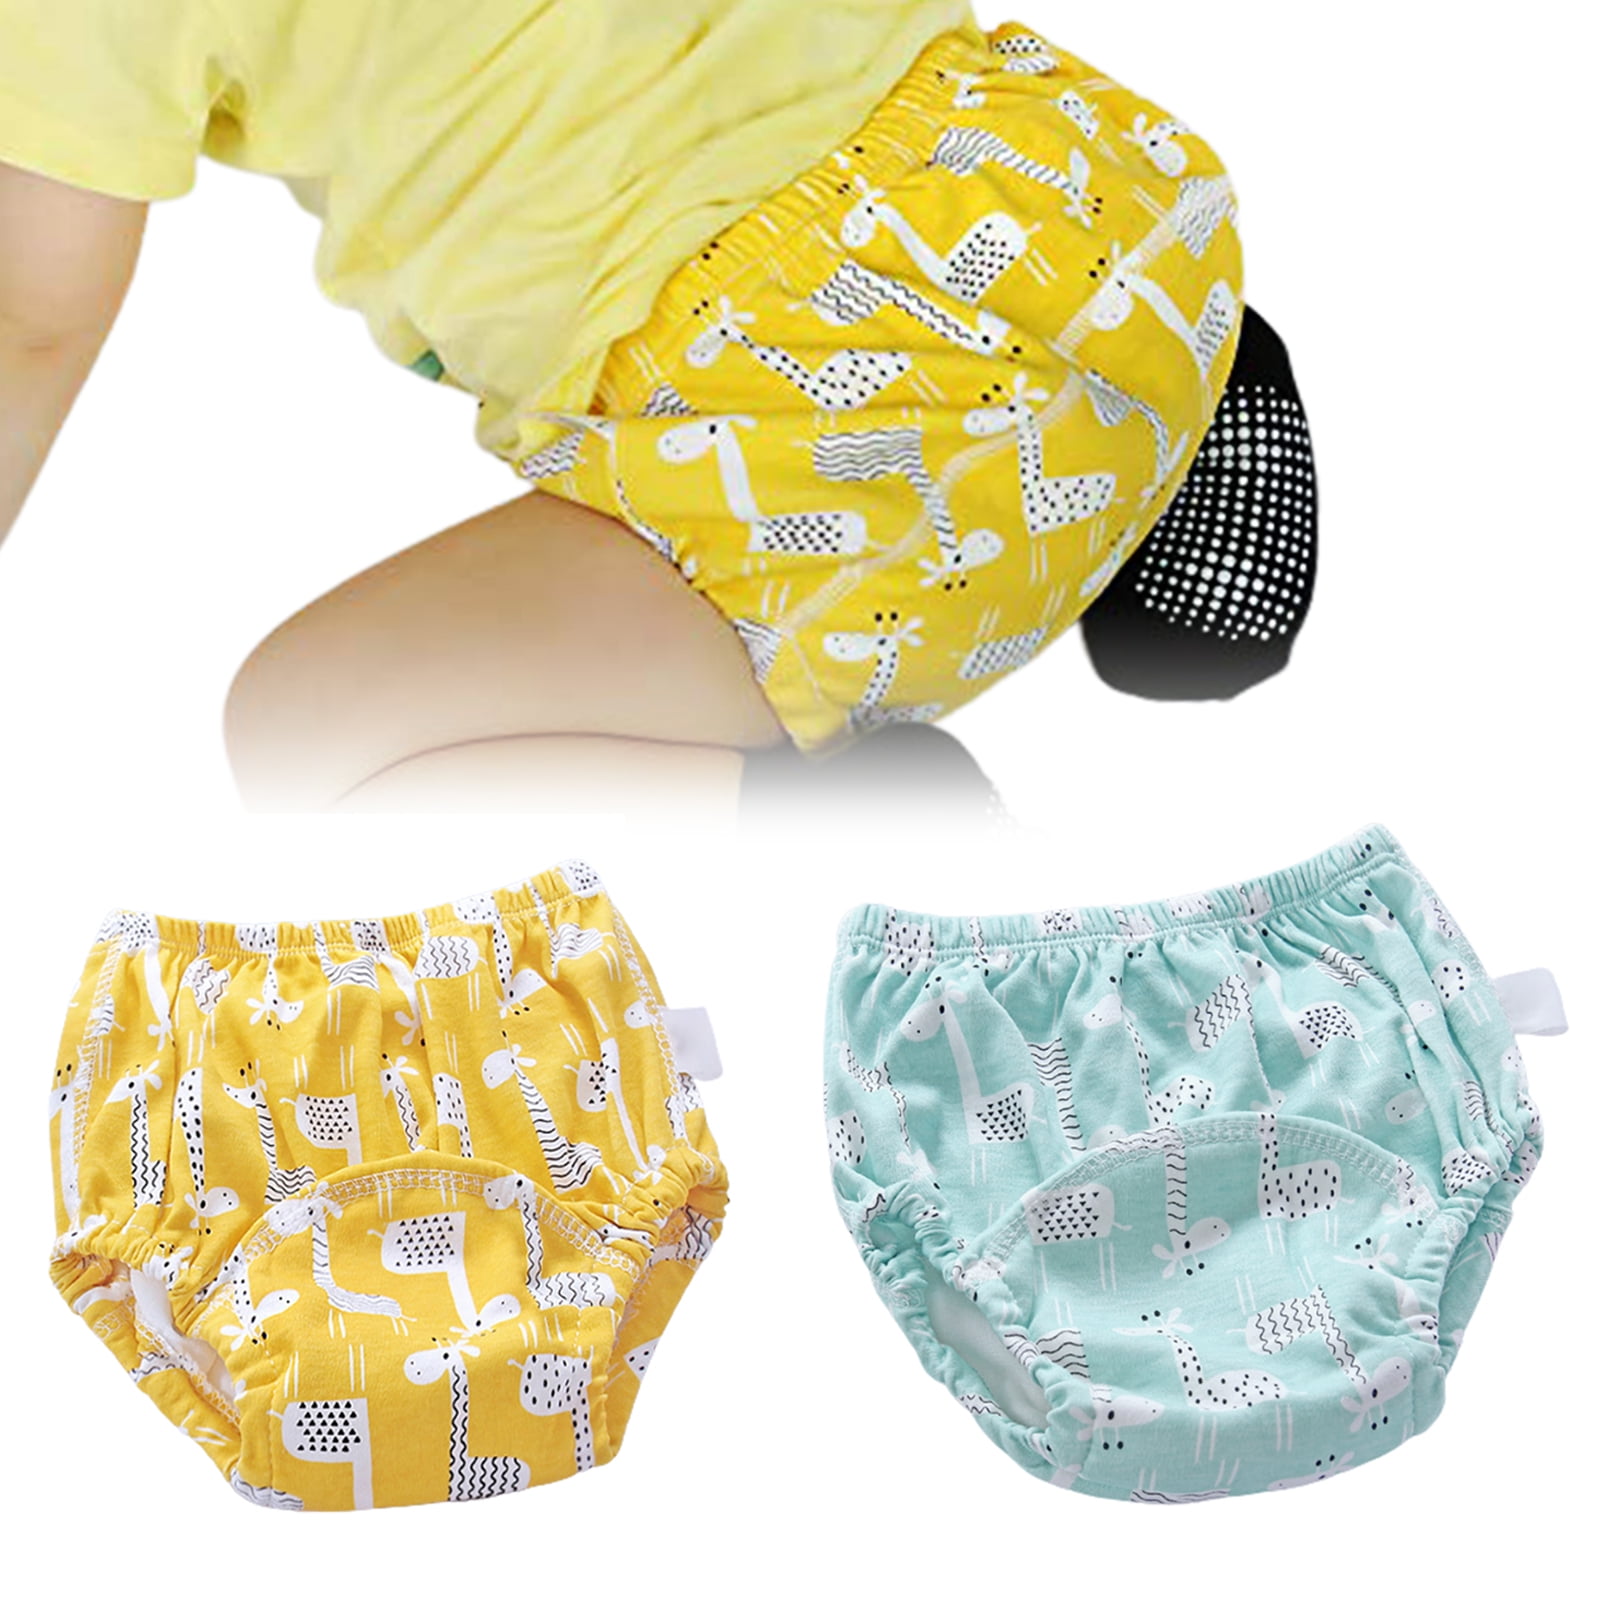 Toddler 6 Layers Potty Training Pants 6 Pack smart sisi New Anti Leakage Training Pants for Babies 